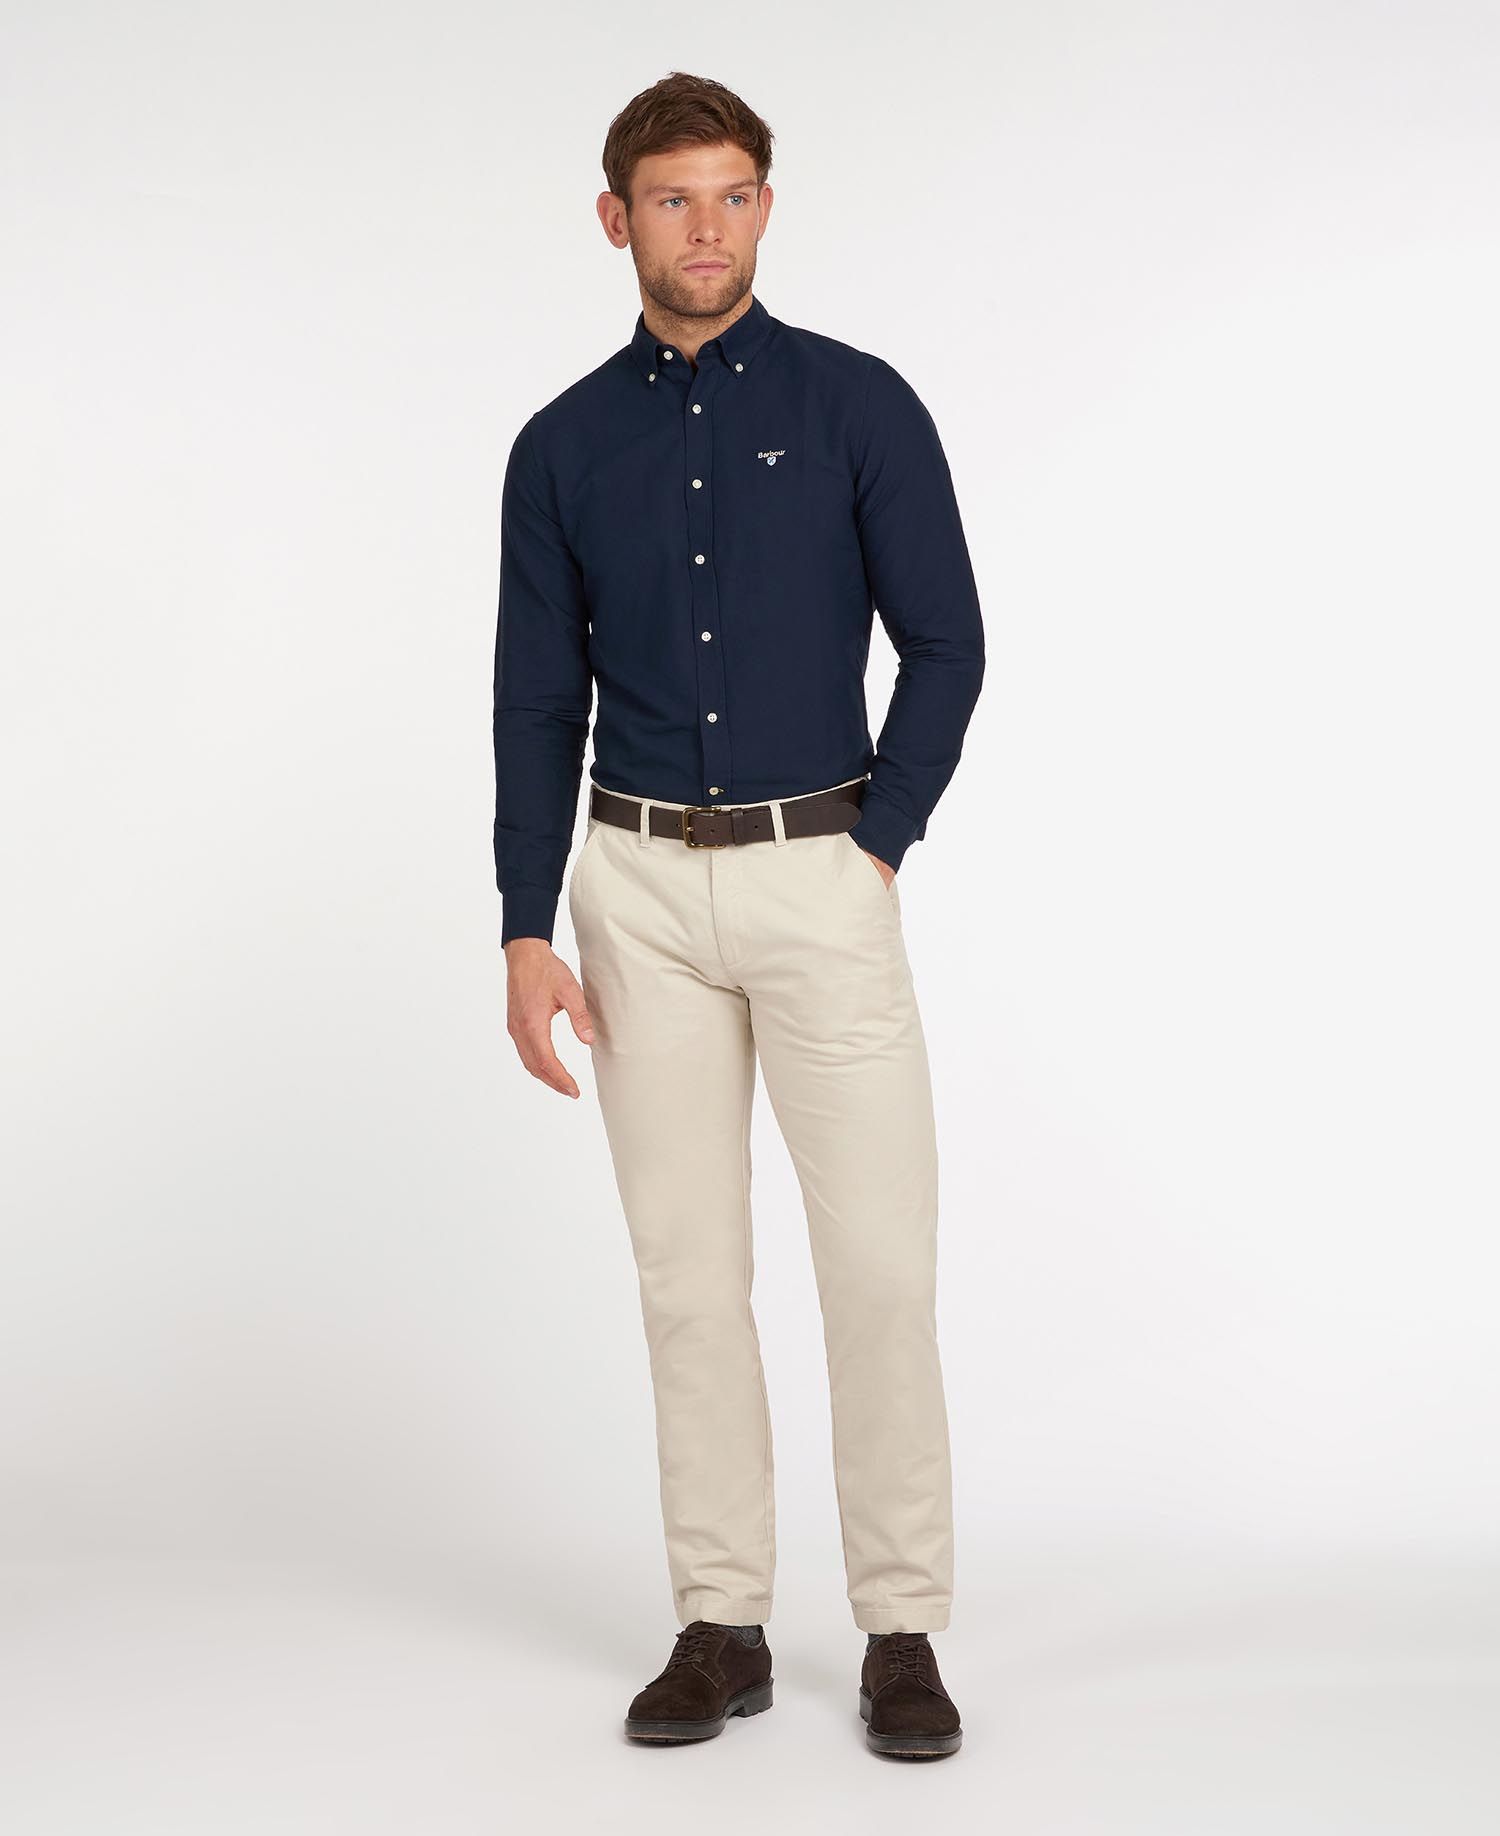 Barbour Oxford 3 Tailored Shirt in Navy | Barbour